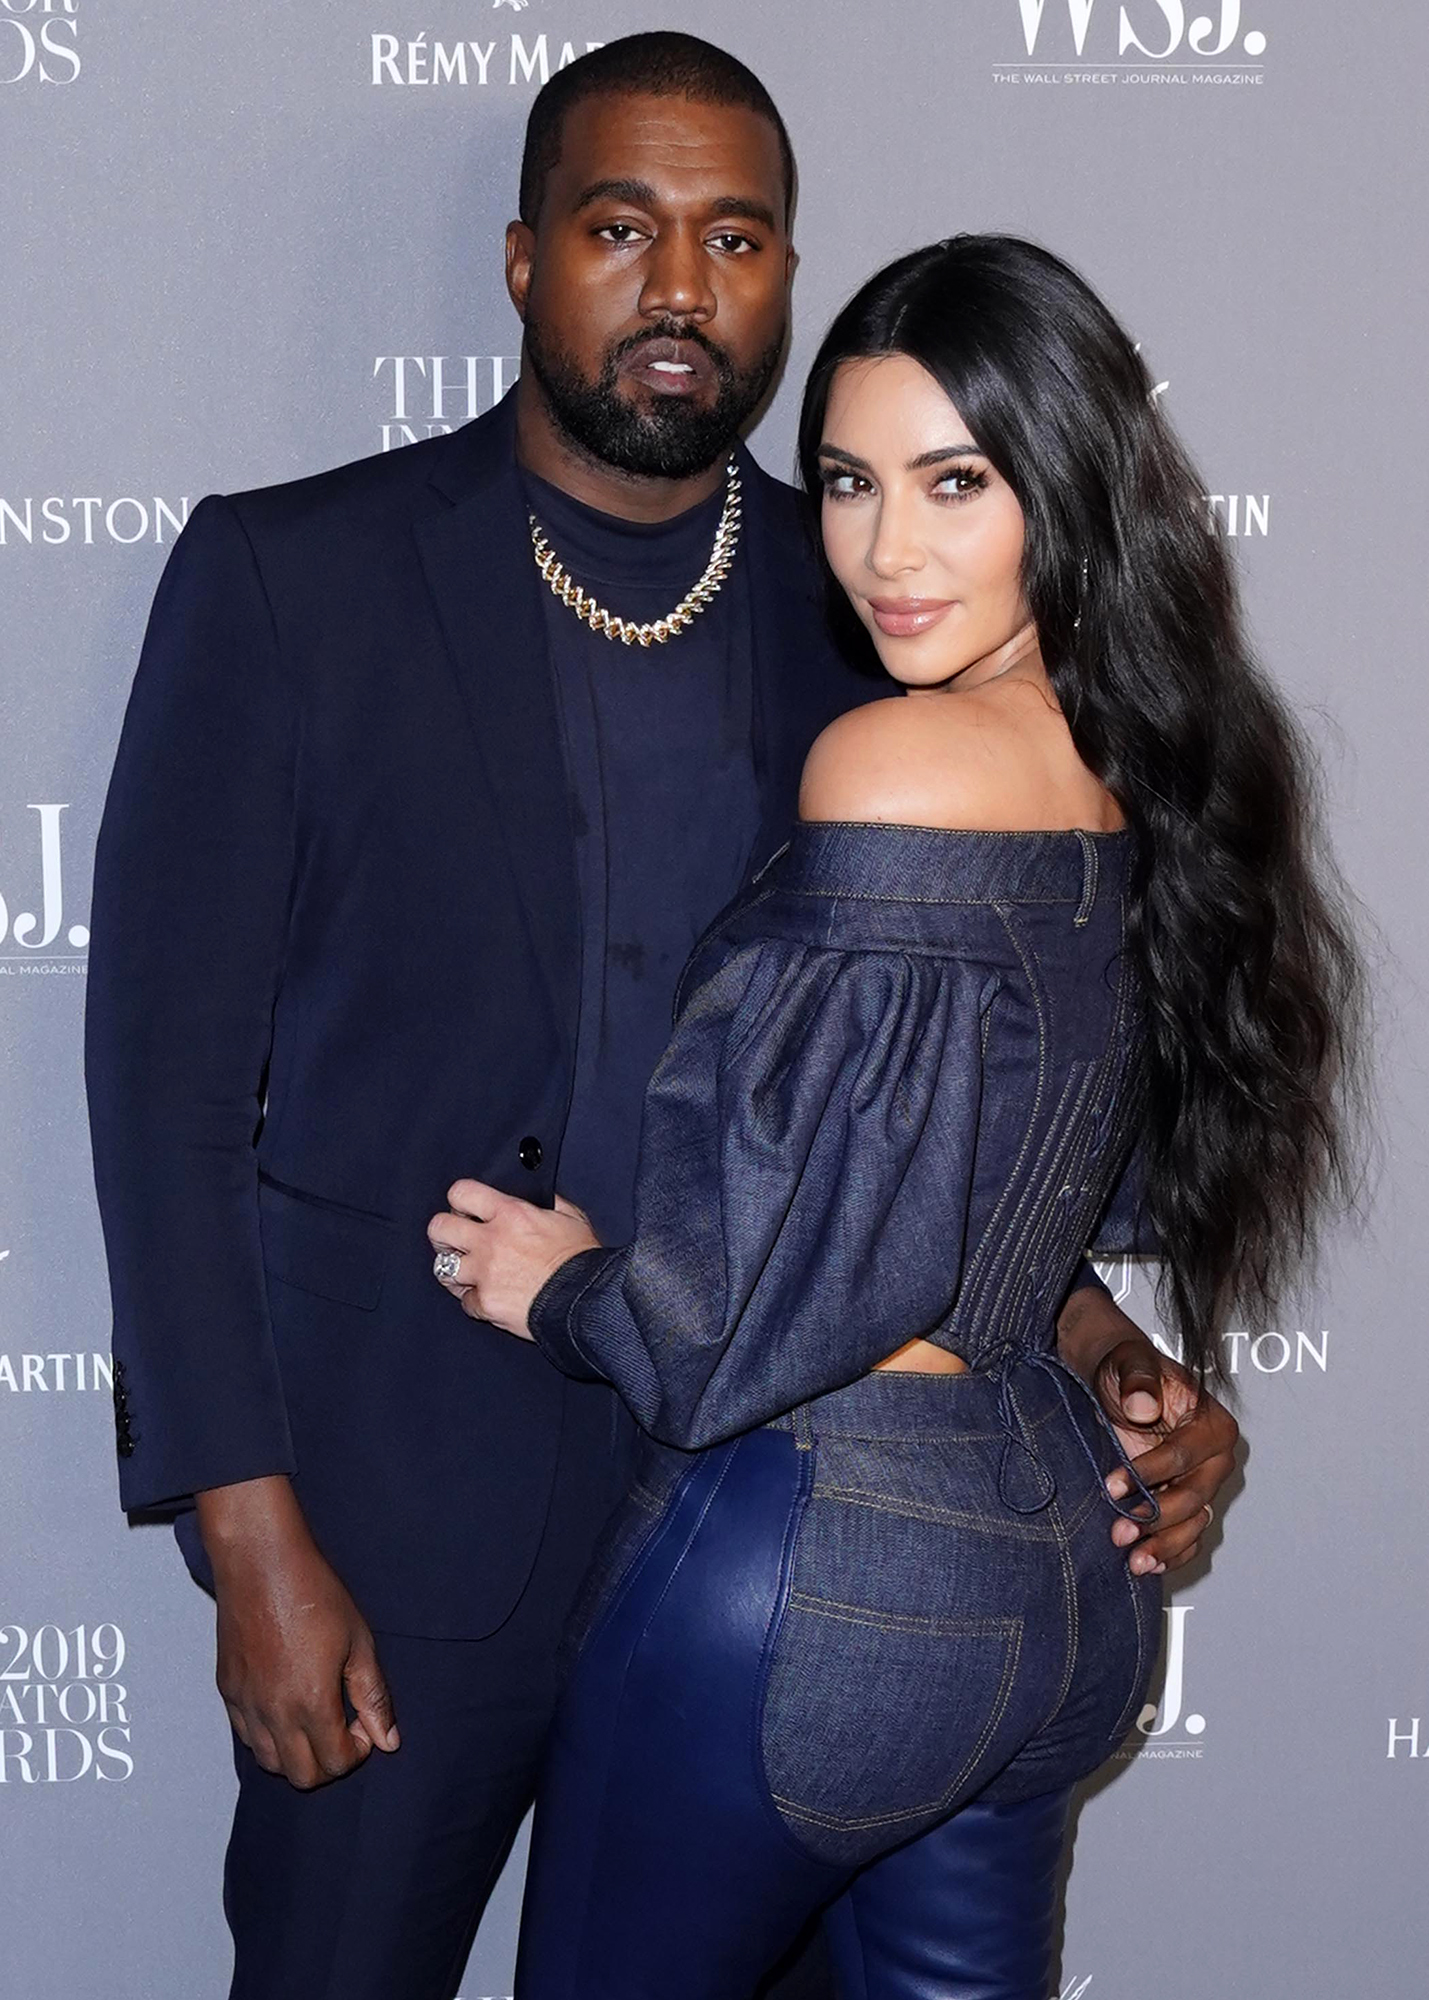 what happened to kim and kanye